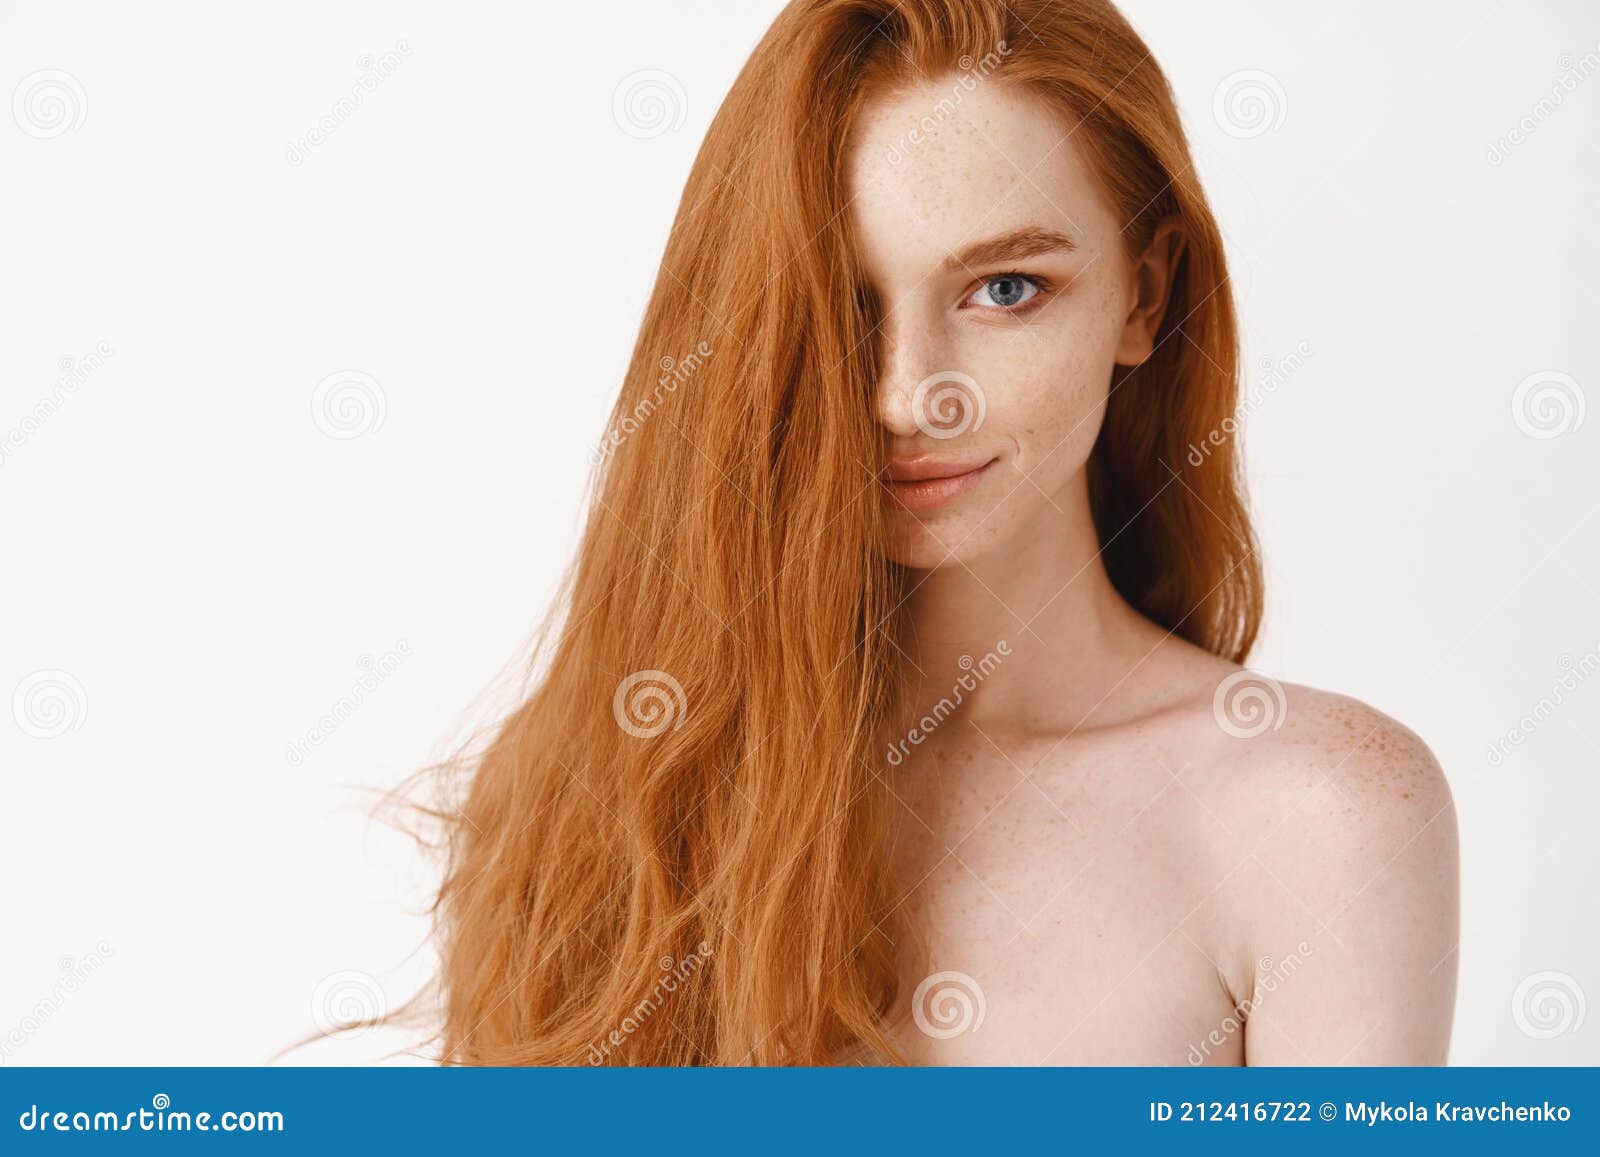 andrew hallford add photo red hair green eyes nude